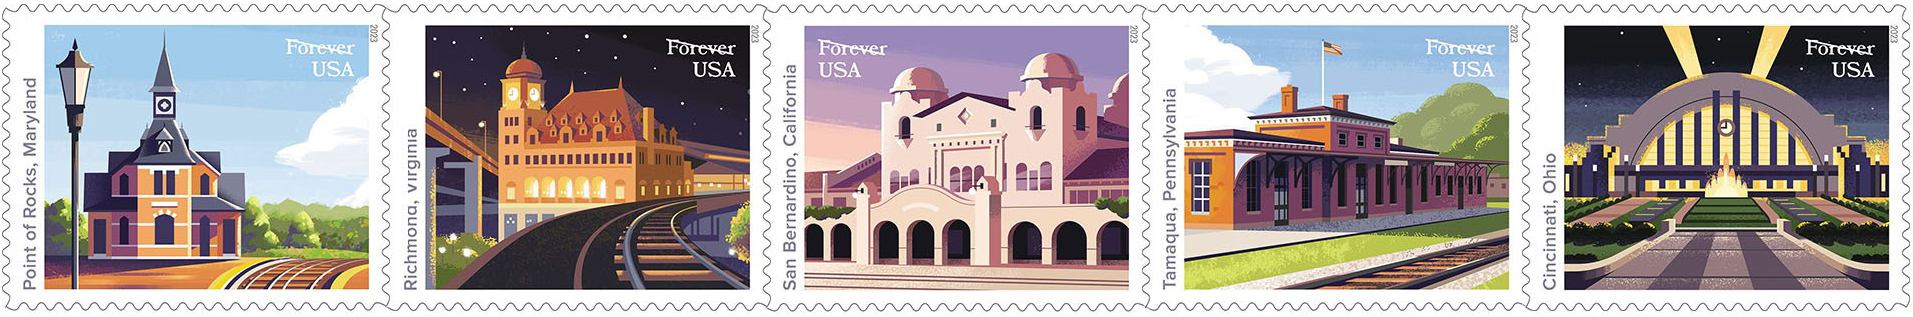 New Railroad Station Stamps